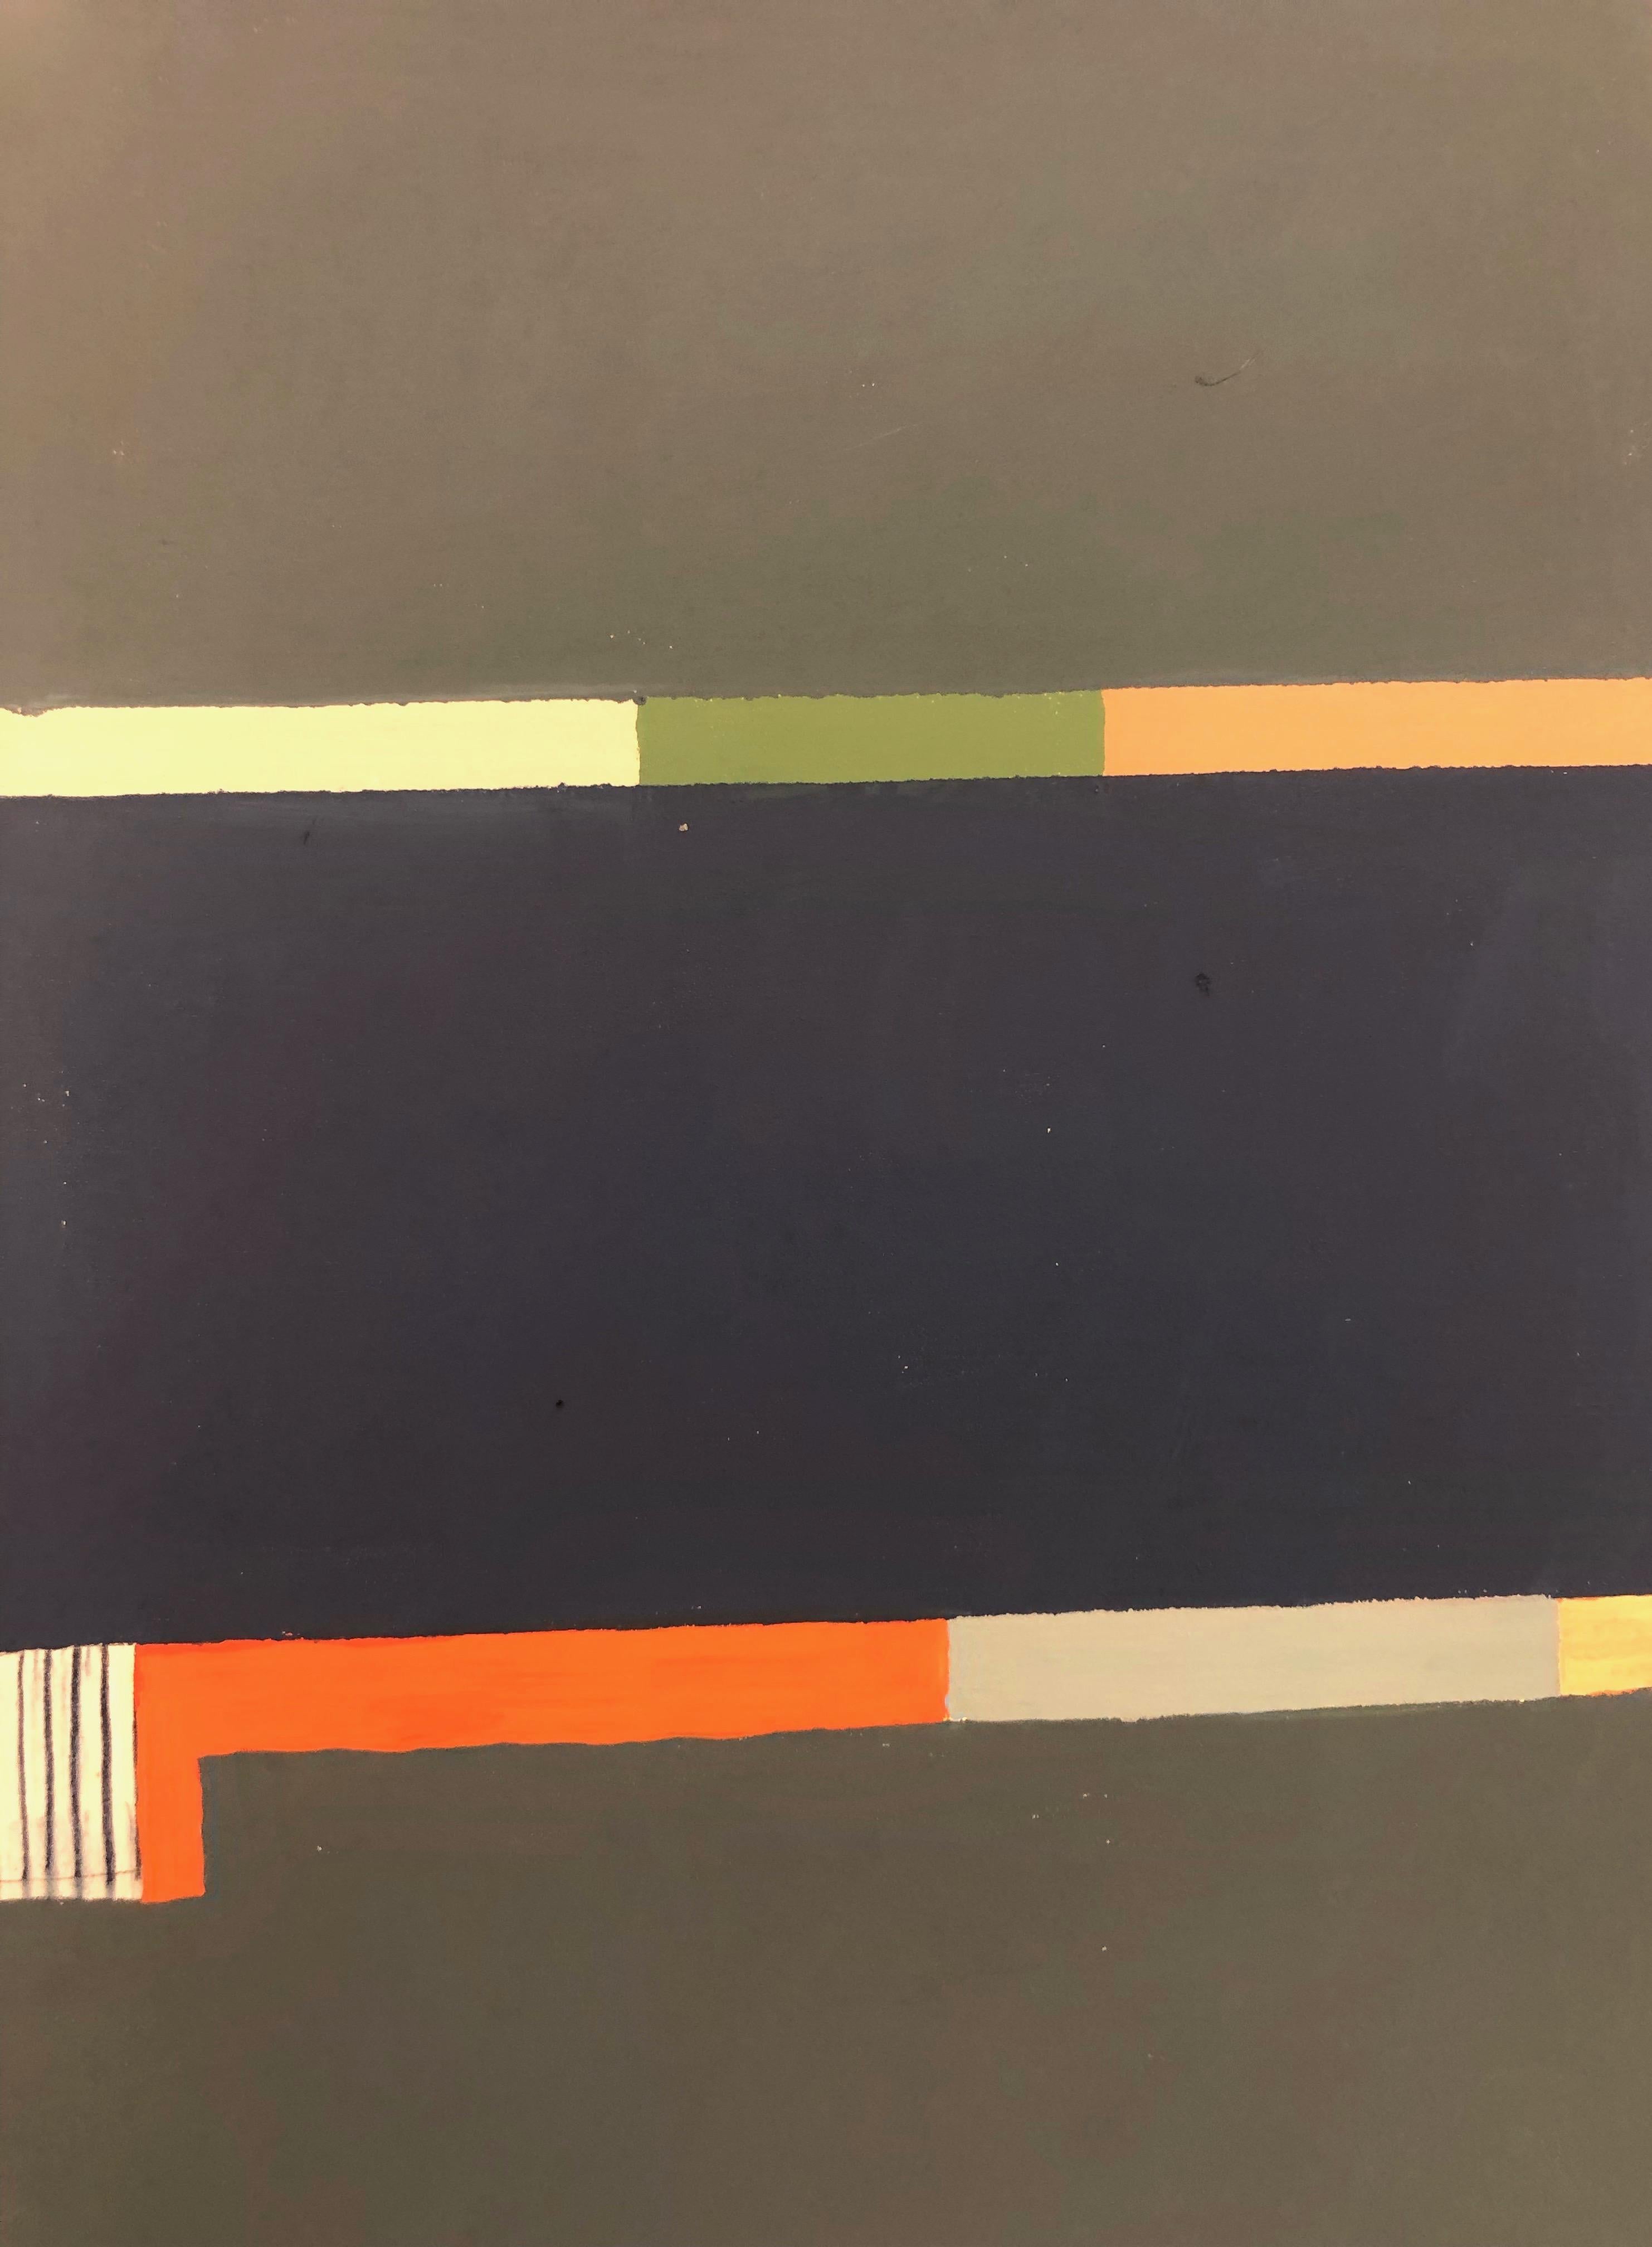 In this abstract painting in gouache and ink on paper by Elizabeth Gourlay, clean and precise, carefully ordered stripes and blocks of color in deep indigo, blue, soft green, and rich yellow and orange are lively and vibrant against the soft beige